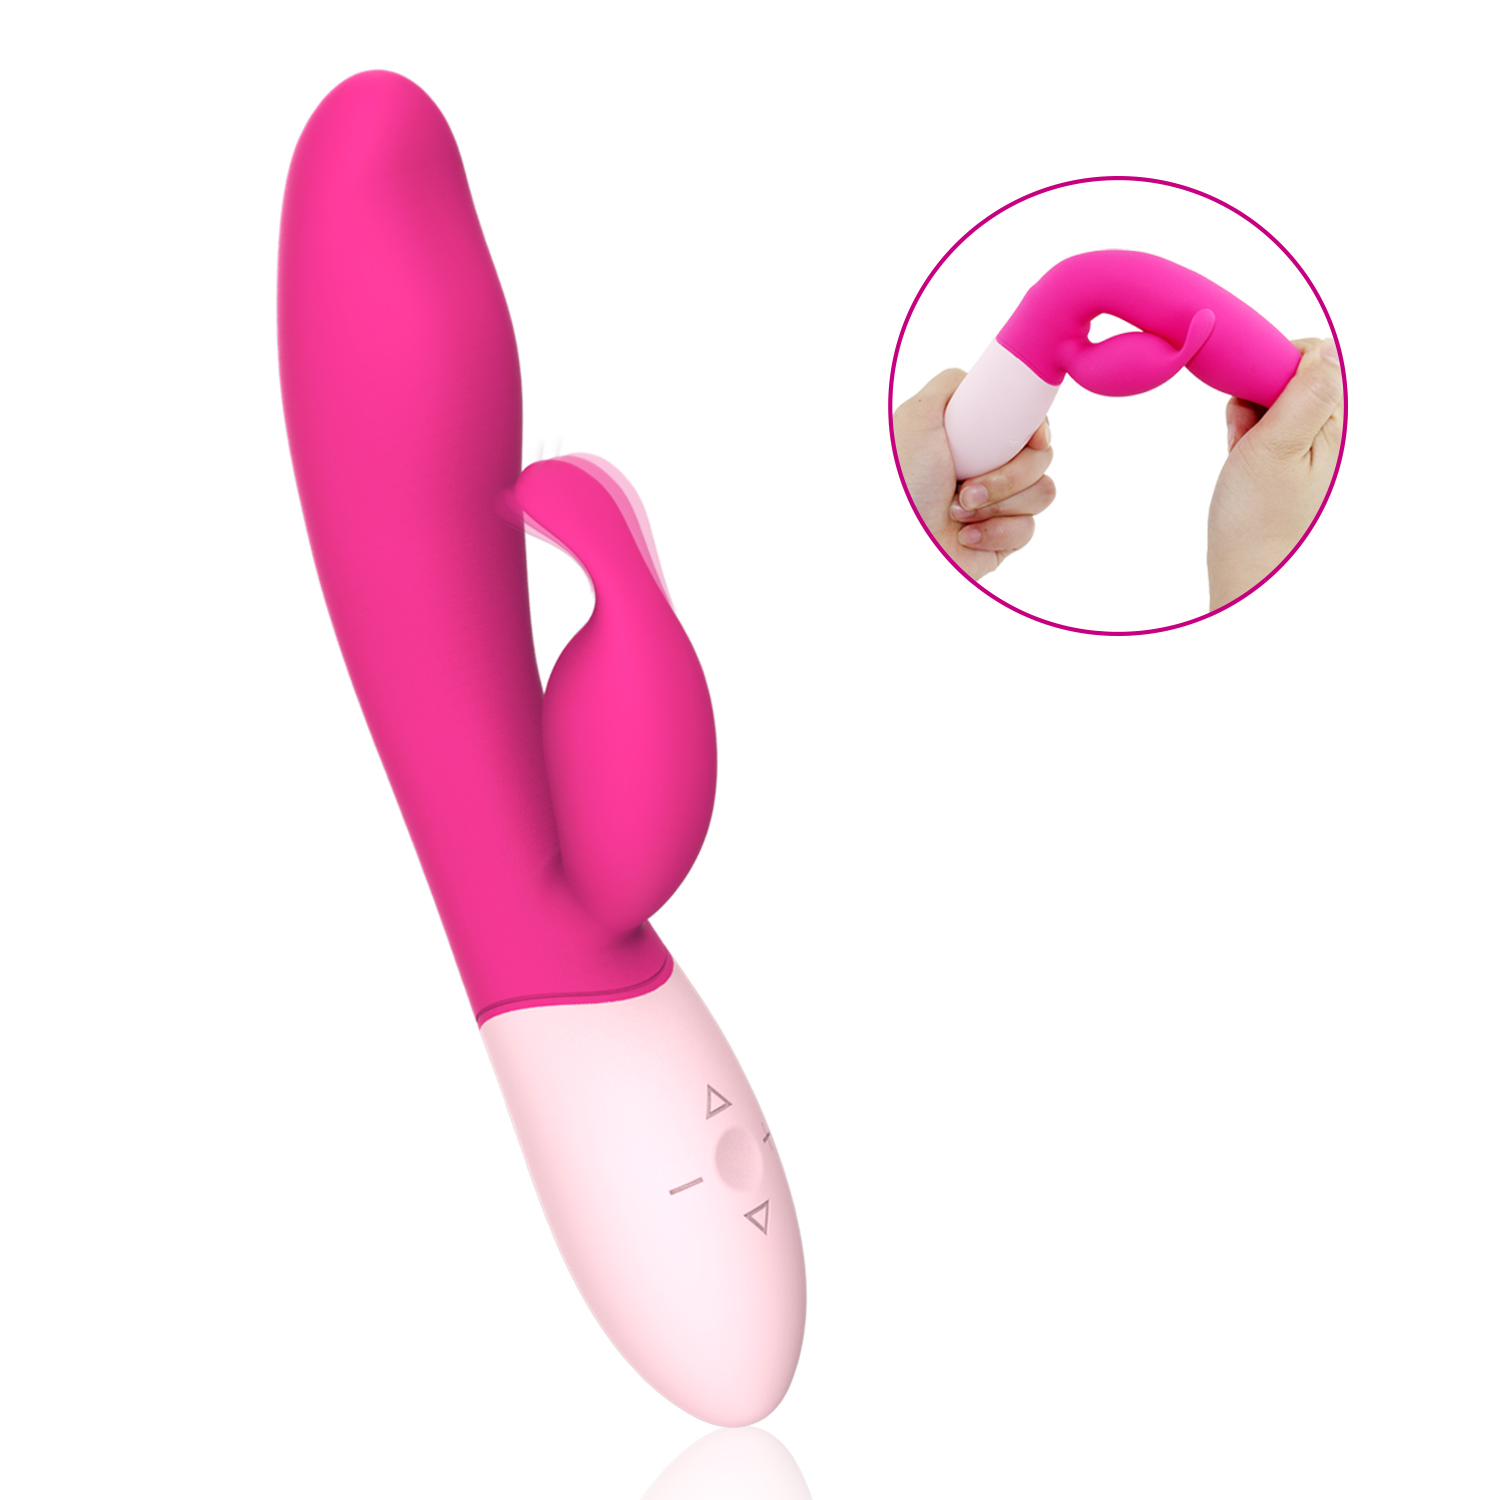 Adult Sex Toy